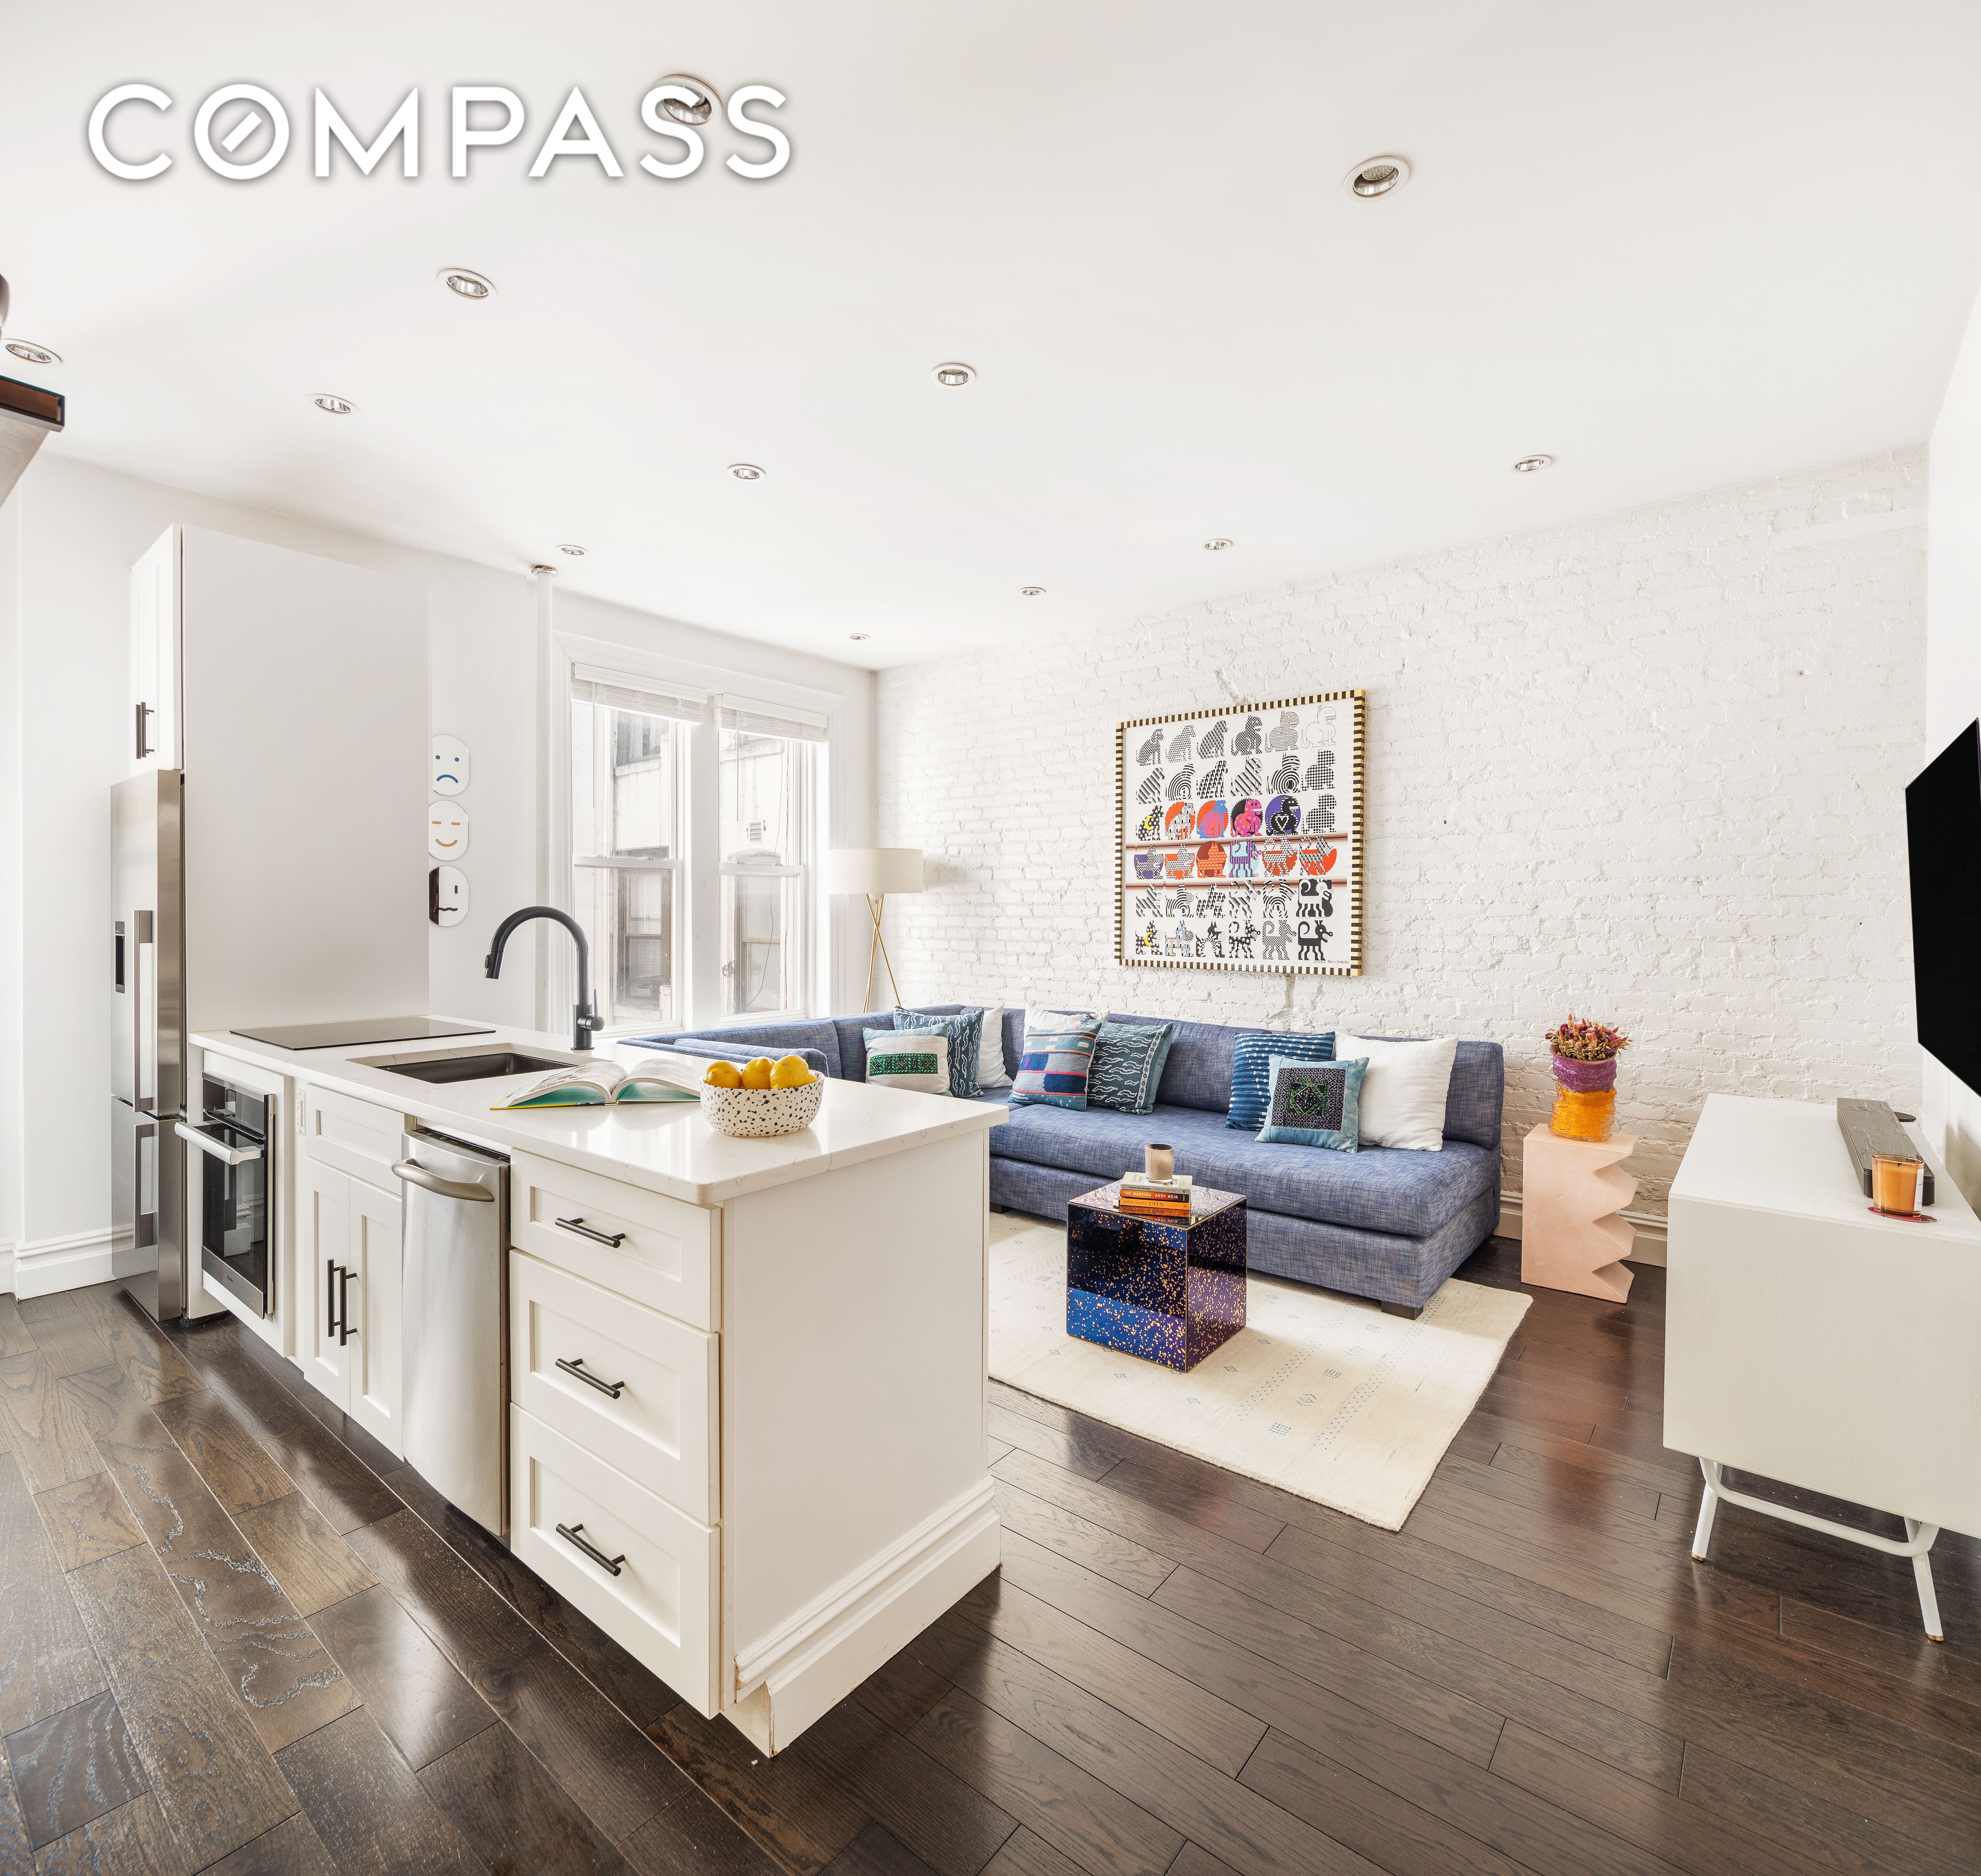 124 Thompson Street 24, Soho, Downtown, NYC - 2 Bedrooms  
2 Bathrooms  
5 Rooms - 